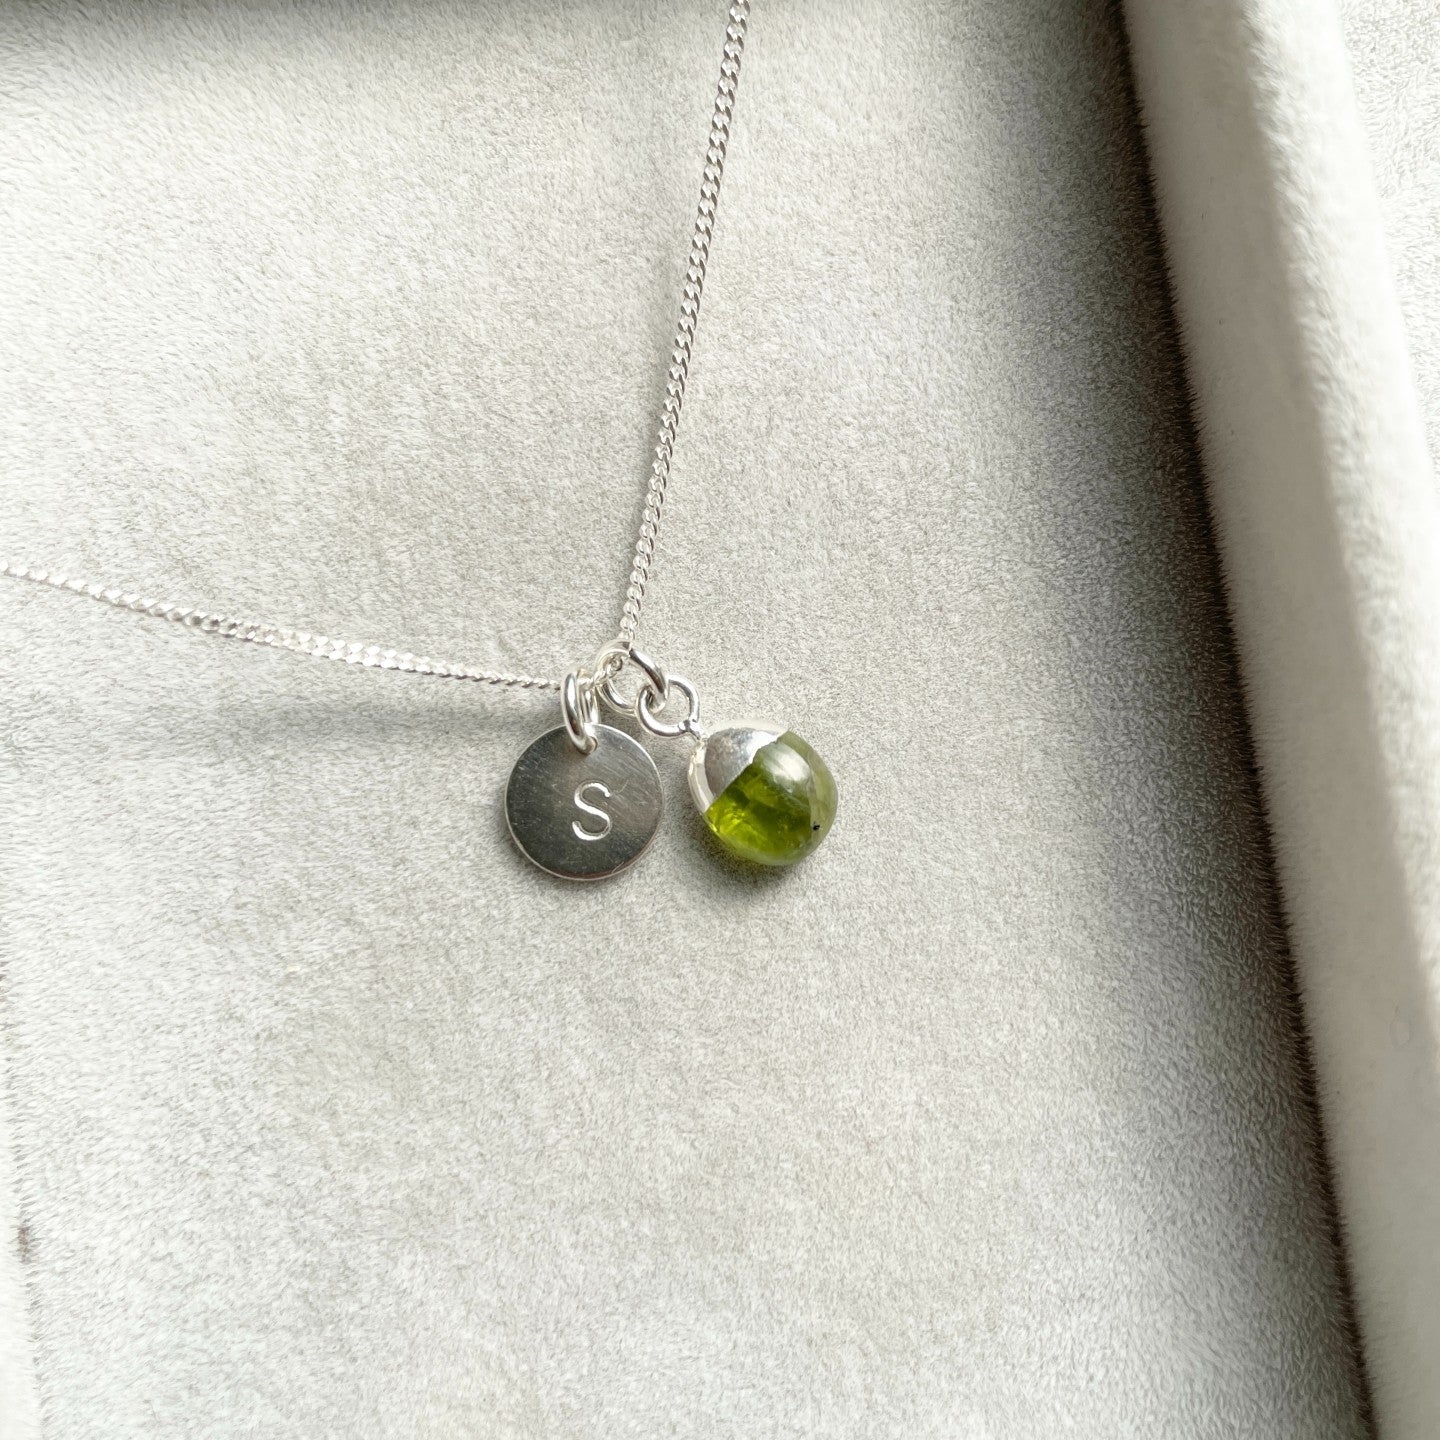 Peridot Tiny Tumbled Necklace | Wellbeing (Silver)